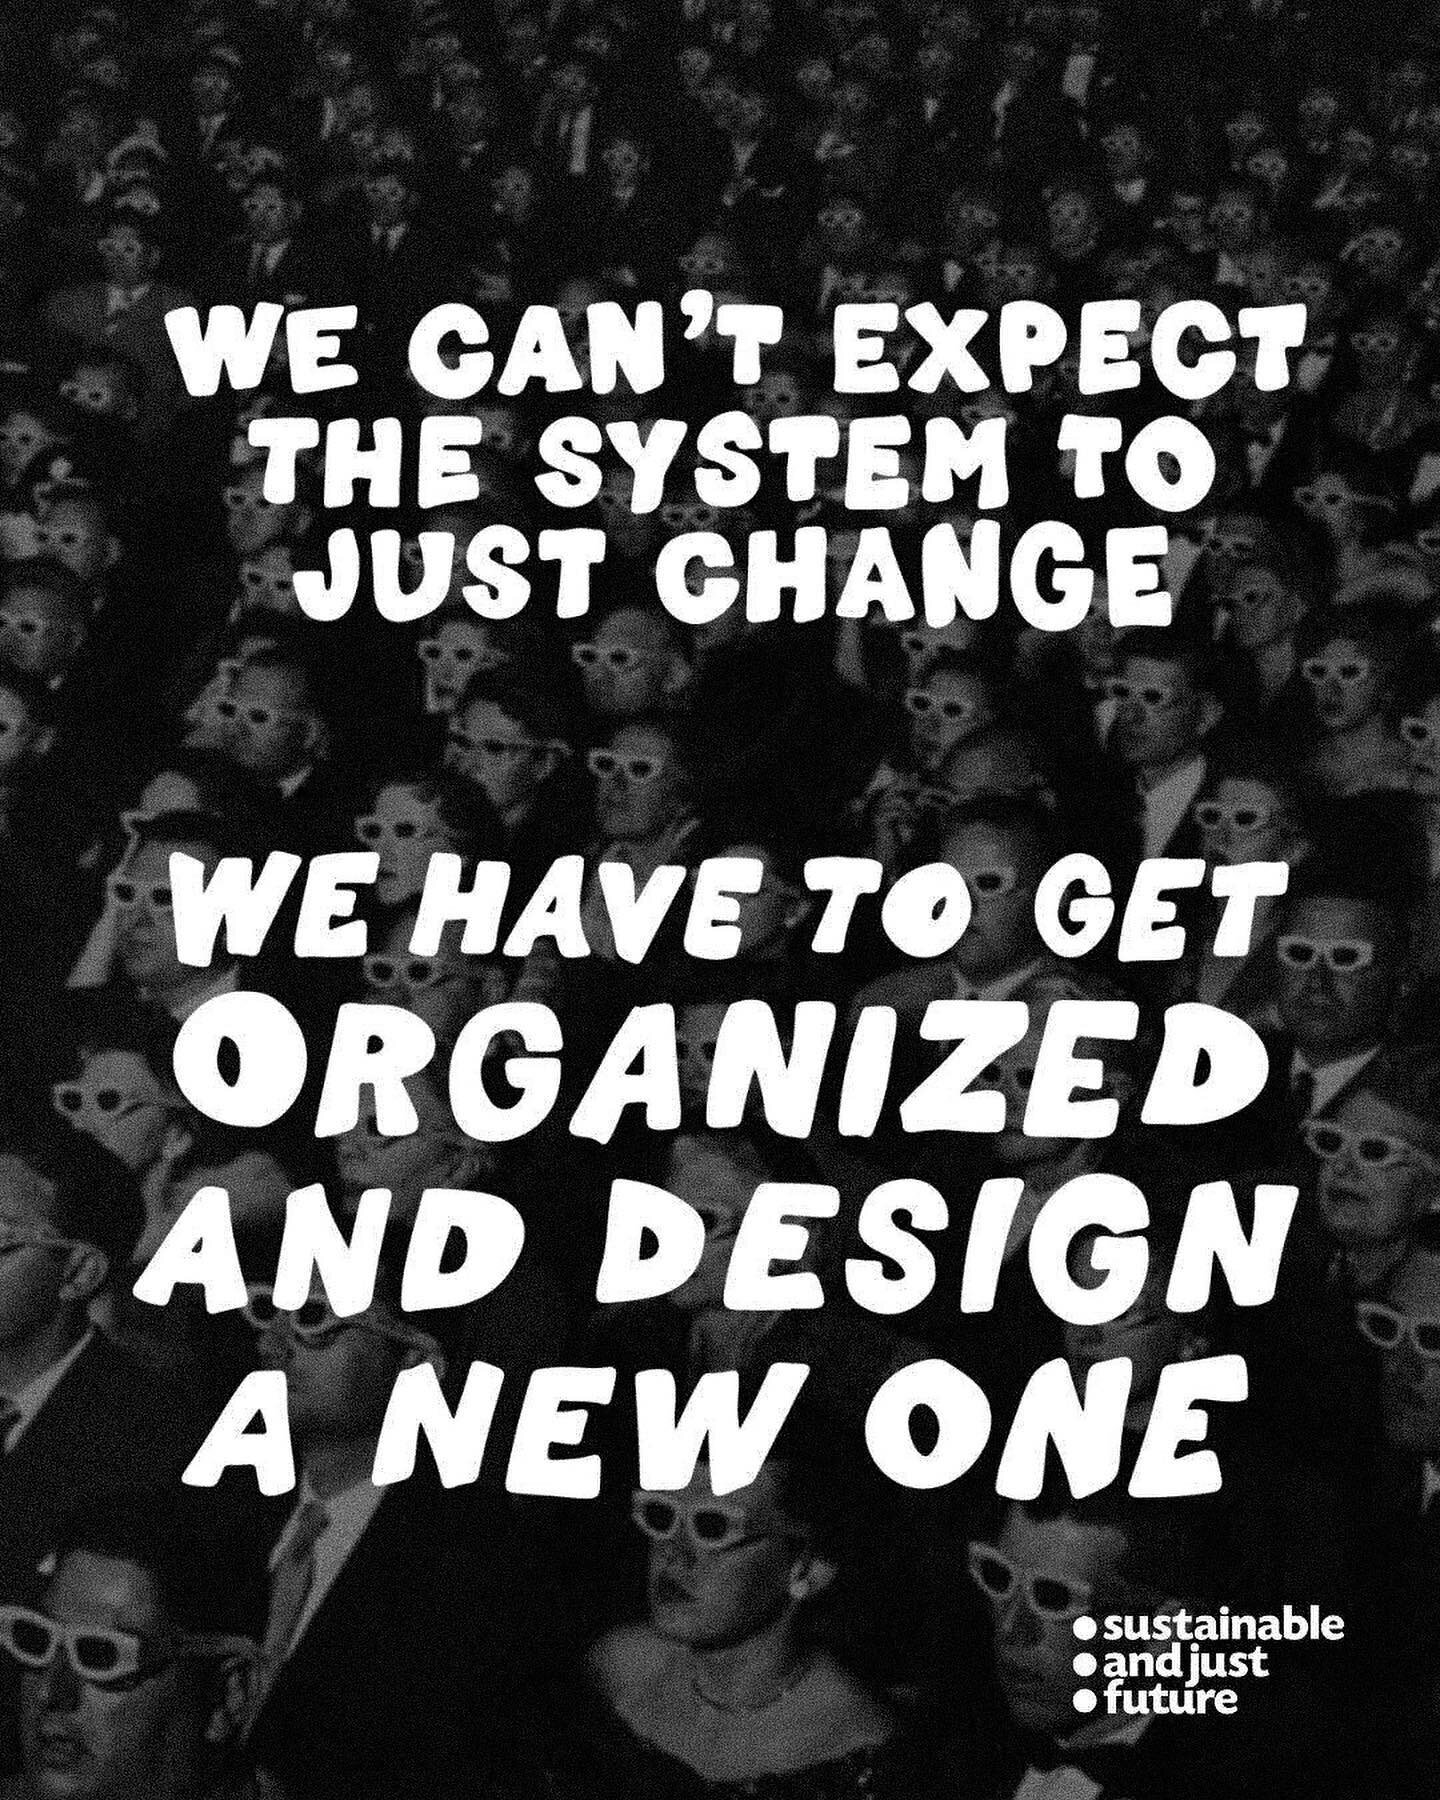 we hearing a lot of &ldquo;individual action doesn&rsquo;t make a difference&rdquo;, &ldquo;we need system change&rdquo; type rhetoric. but who is going to change the system, if not you? if not us? the system is working exactly as designed; collectiv